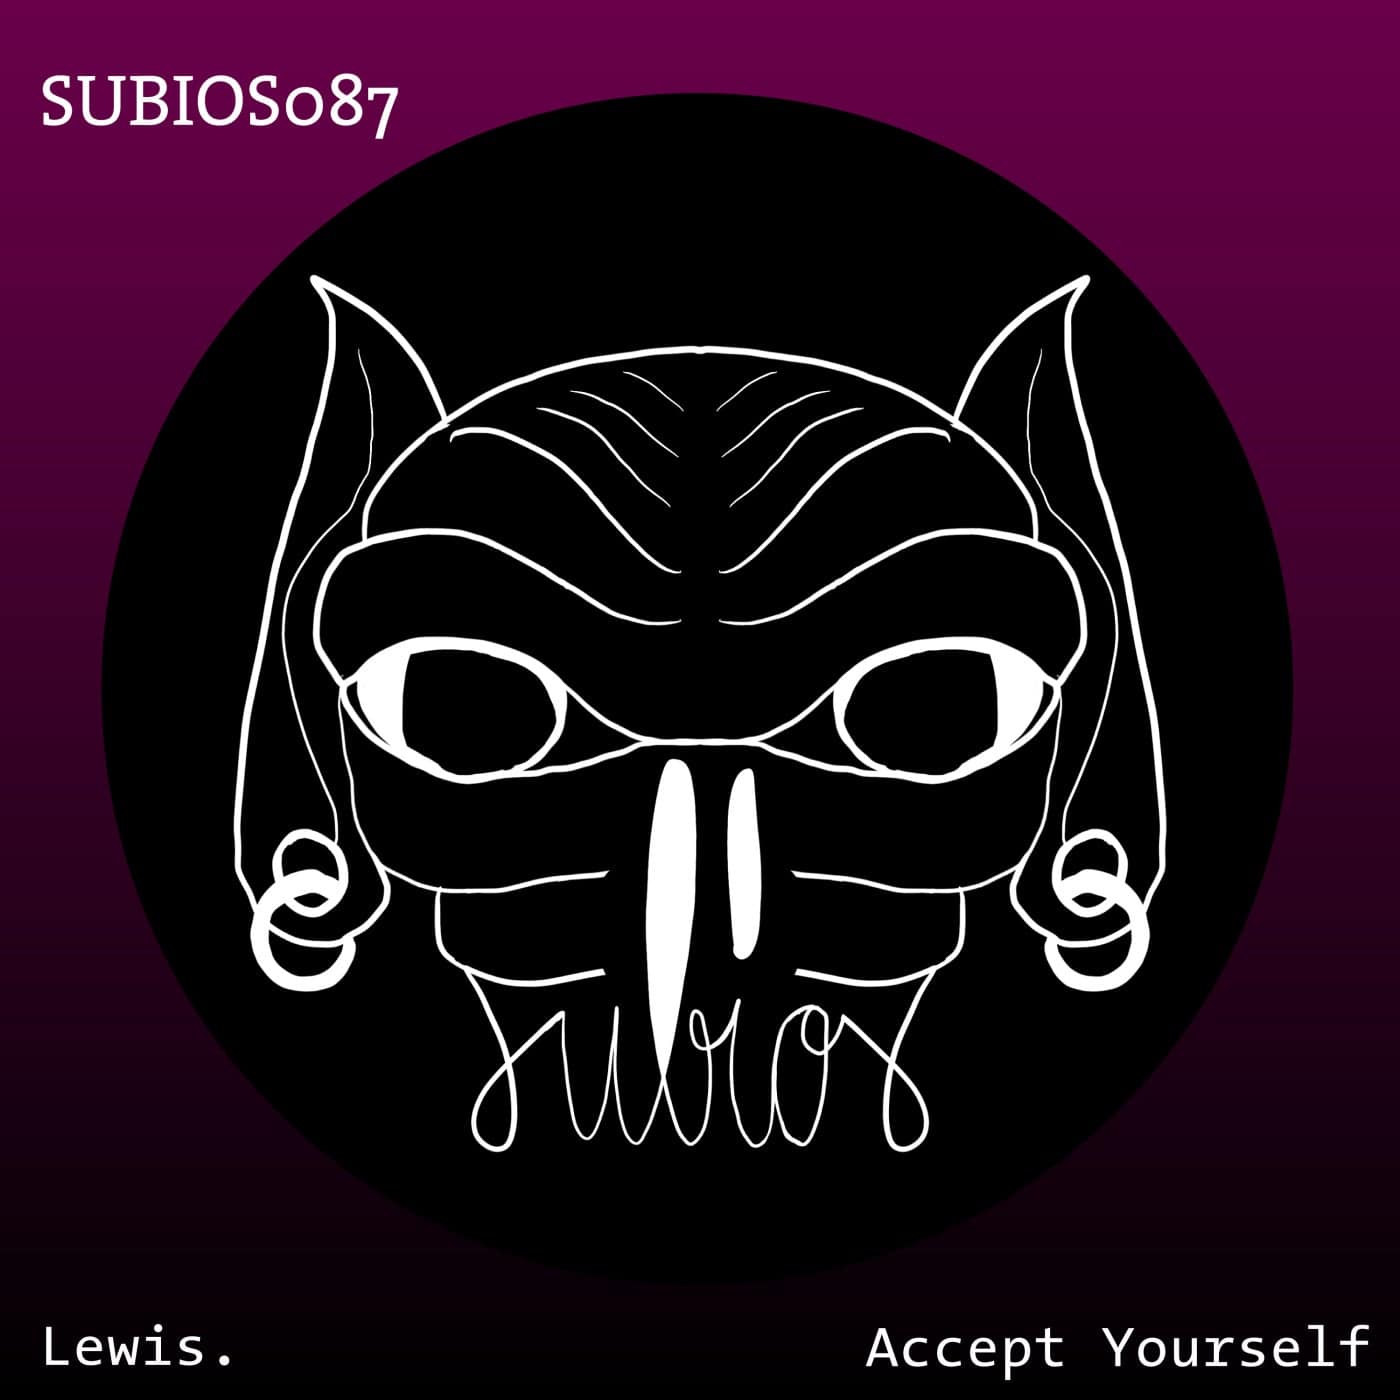 image cover: Lewis. - Accept Yourself / SUBIOS087